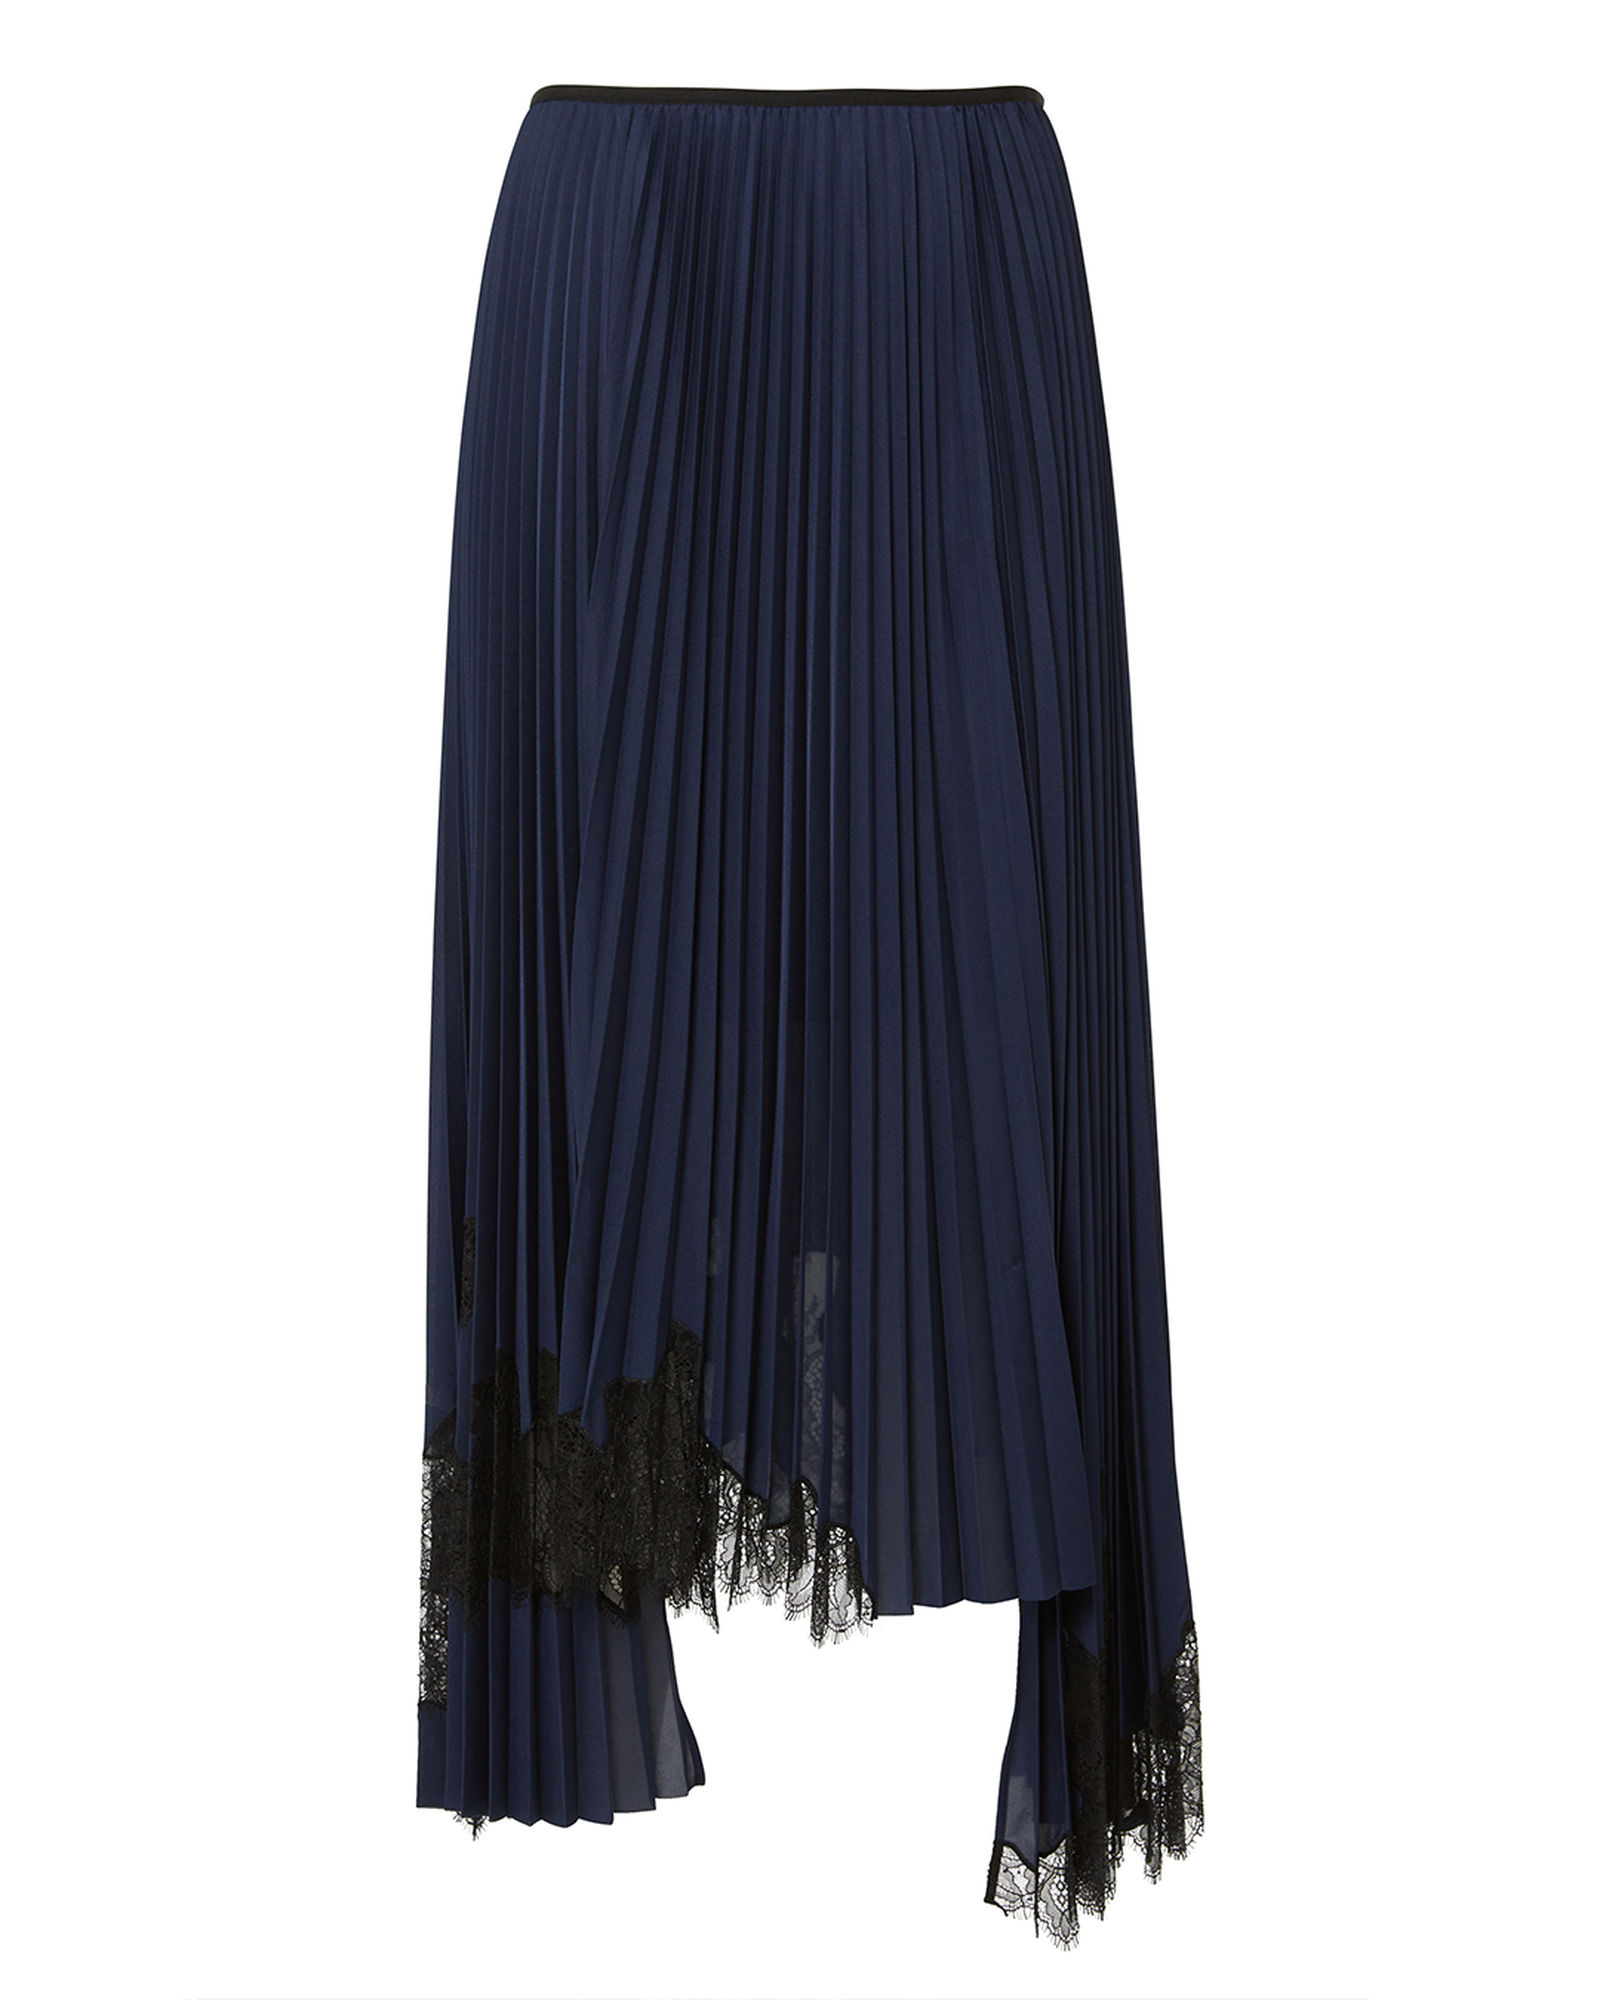 Helmut Lang - Lace-Trimmed Pleated Skirt - Navy | ABOUT ICONS